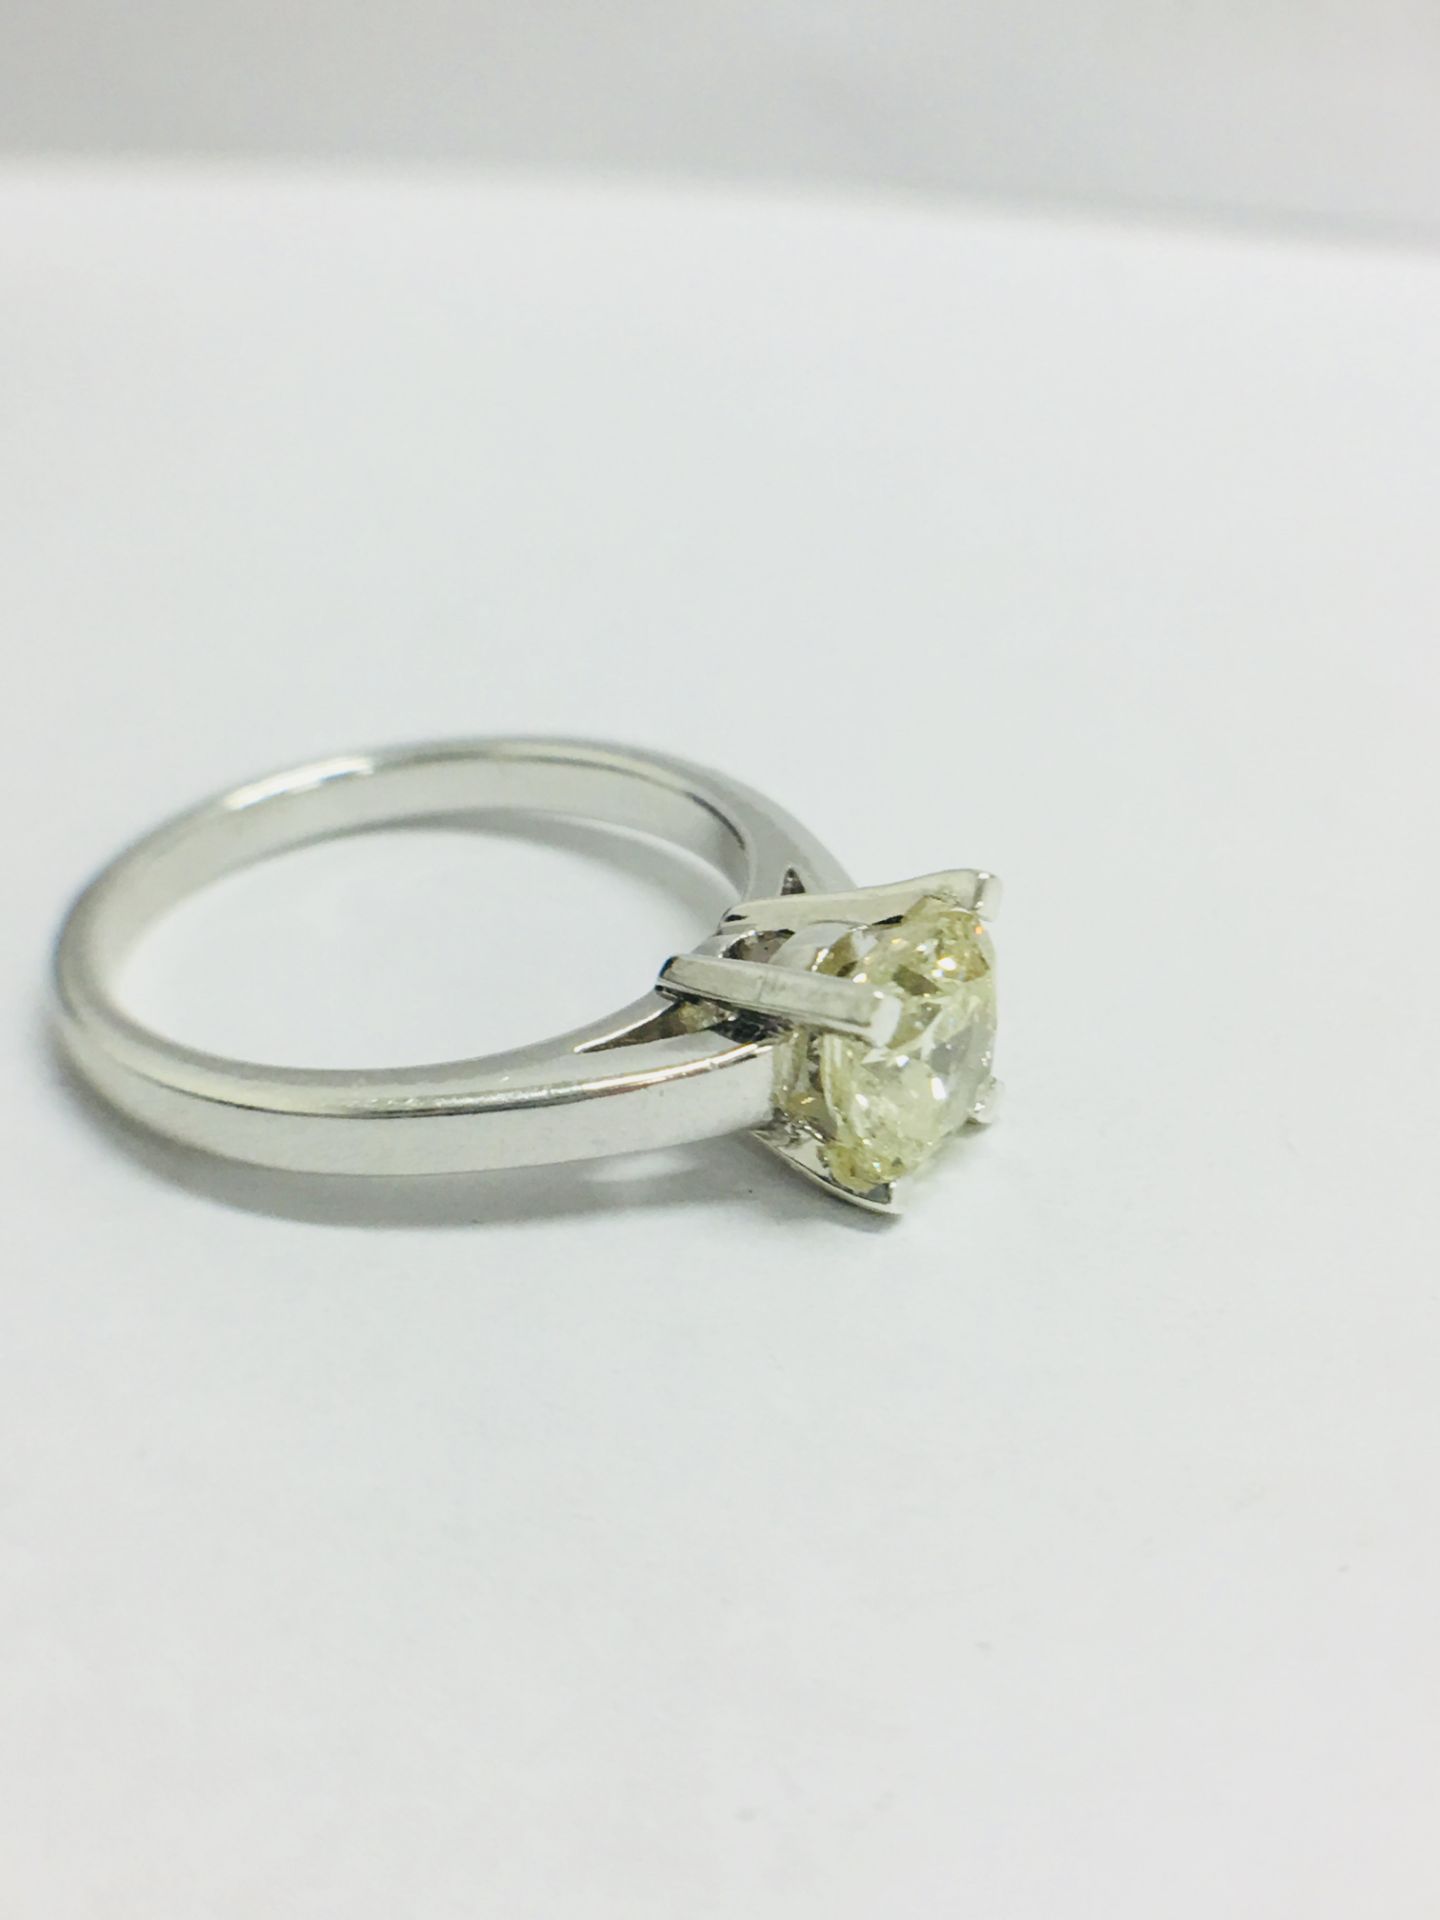 1.00ct diamond solitaire ring with a Cushion cut diamond. J colour and I1 clarity enhanced stone. - Image 7 of 7